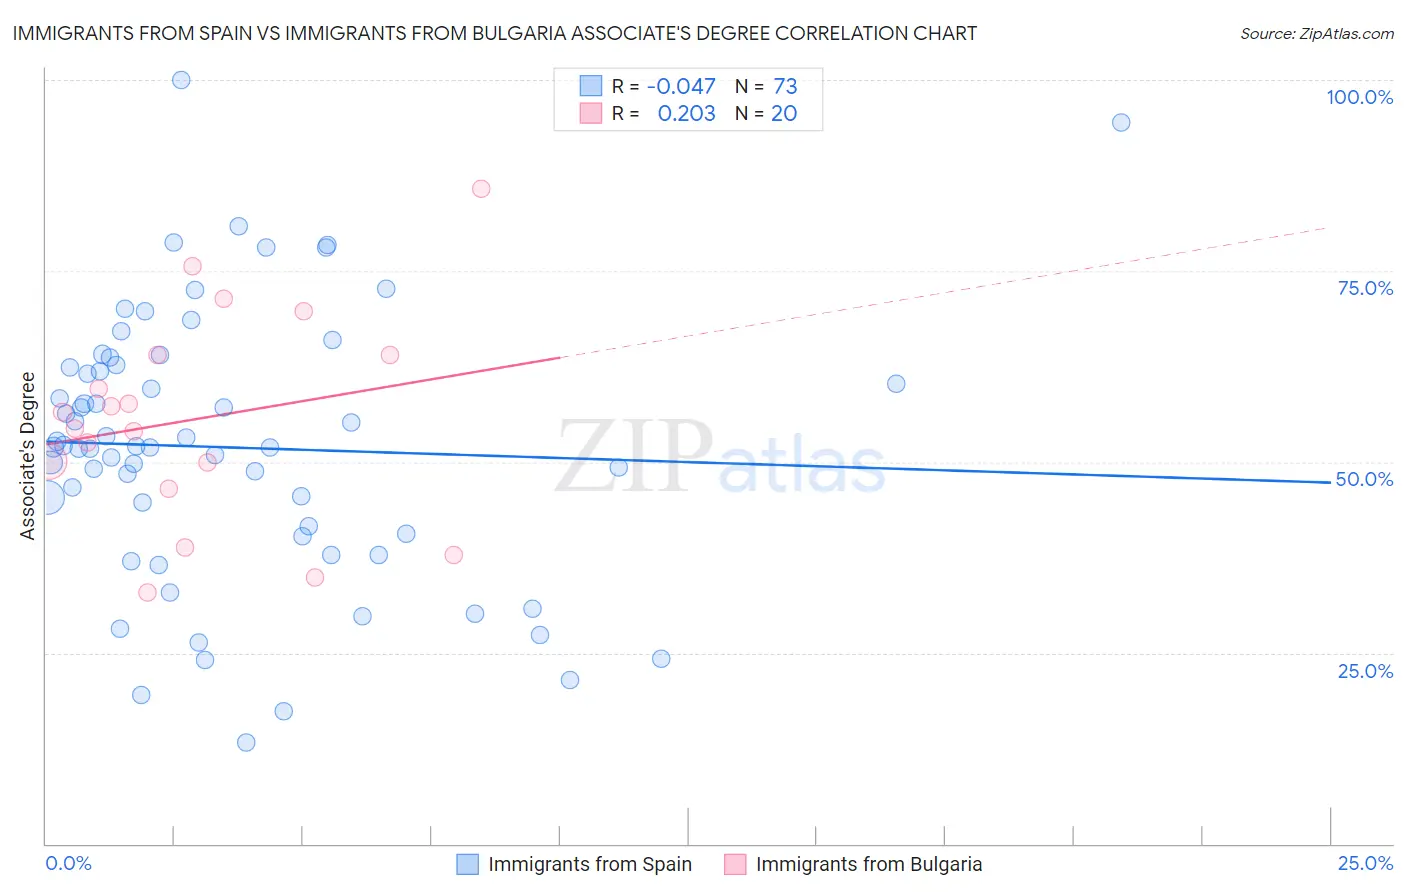 Immigrants from Spain vs Immigrants from Bulgaria Associate's Degree